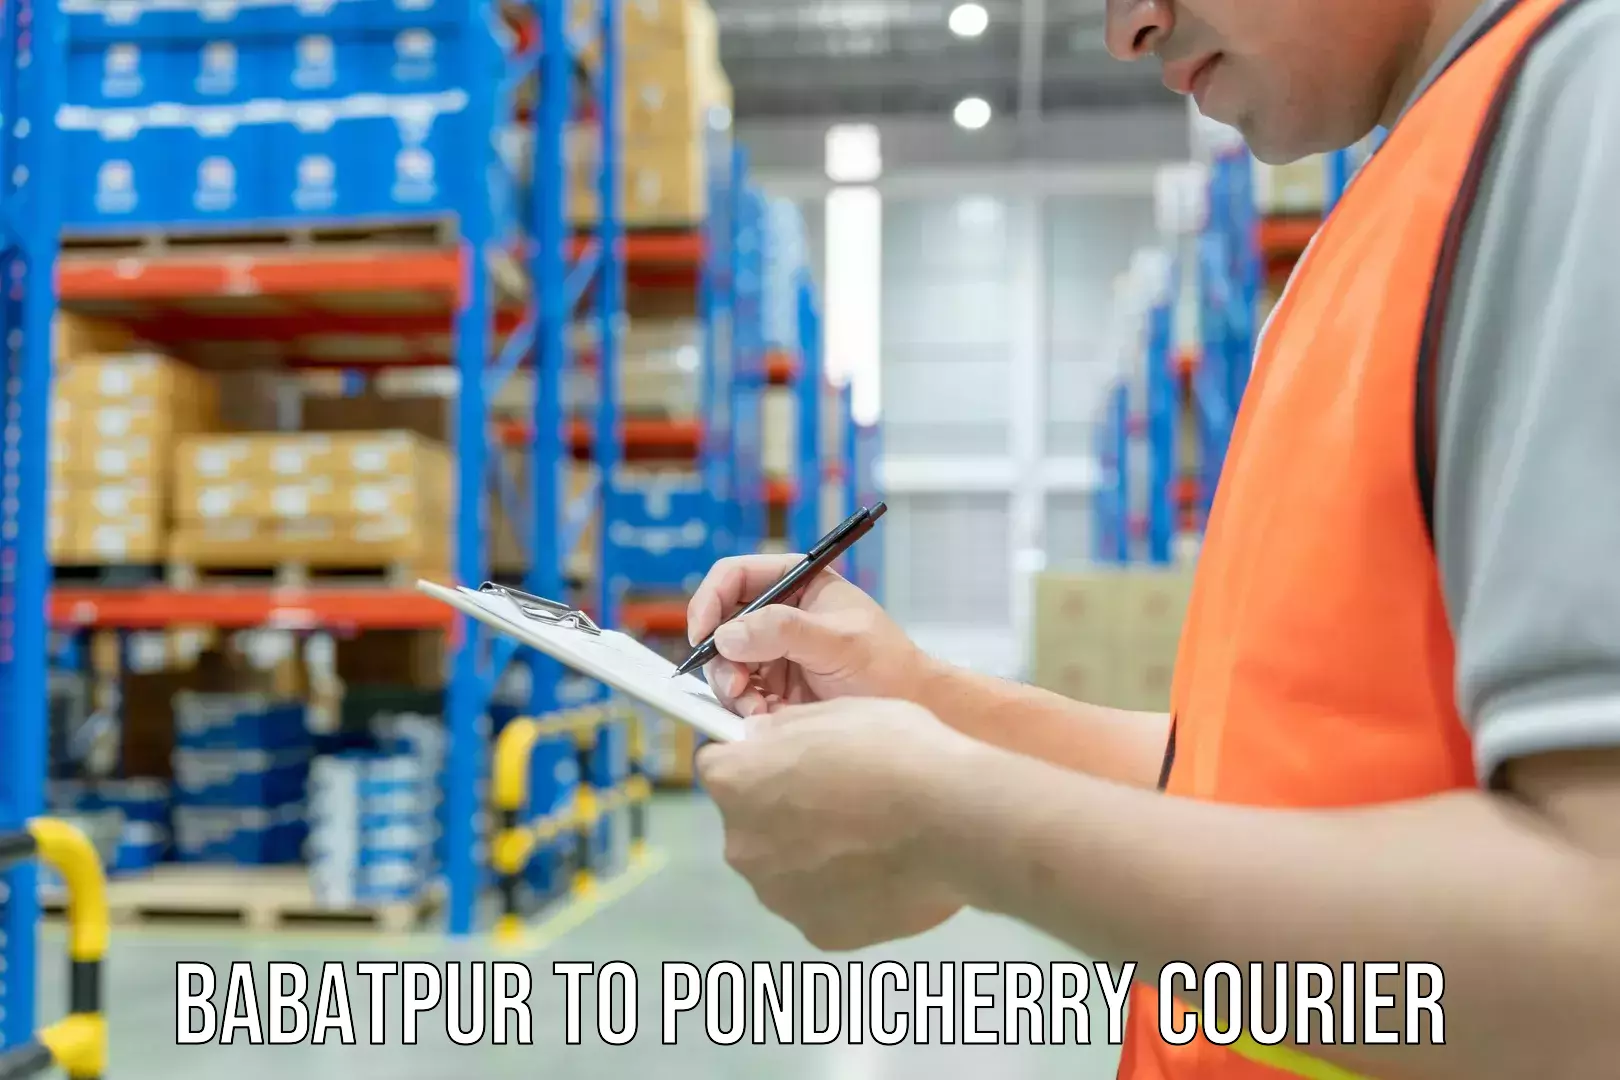 Next-day delivery options Babatpur to Pondicherry